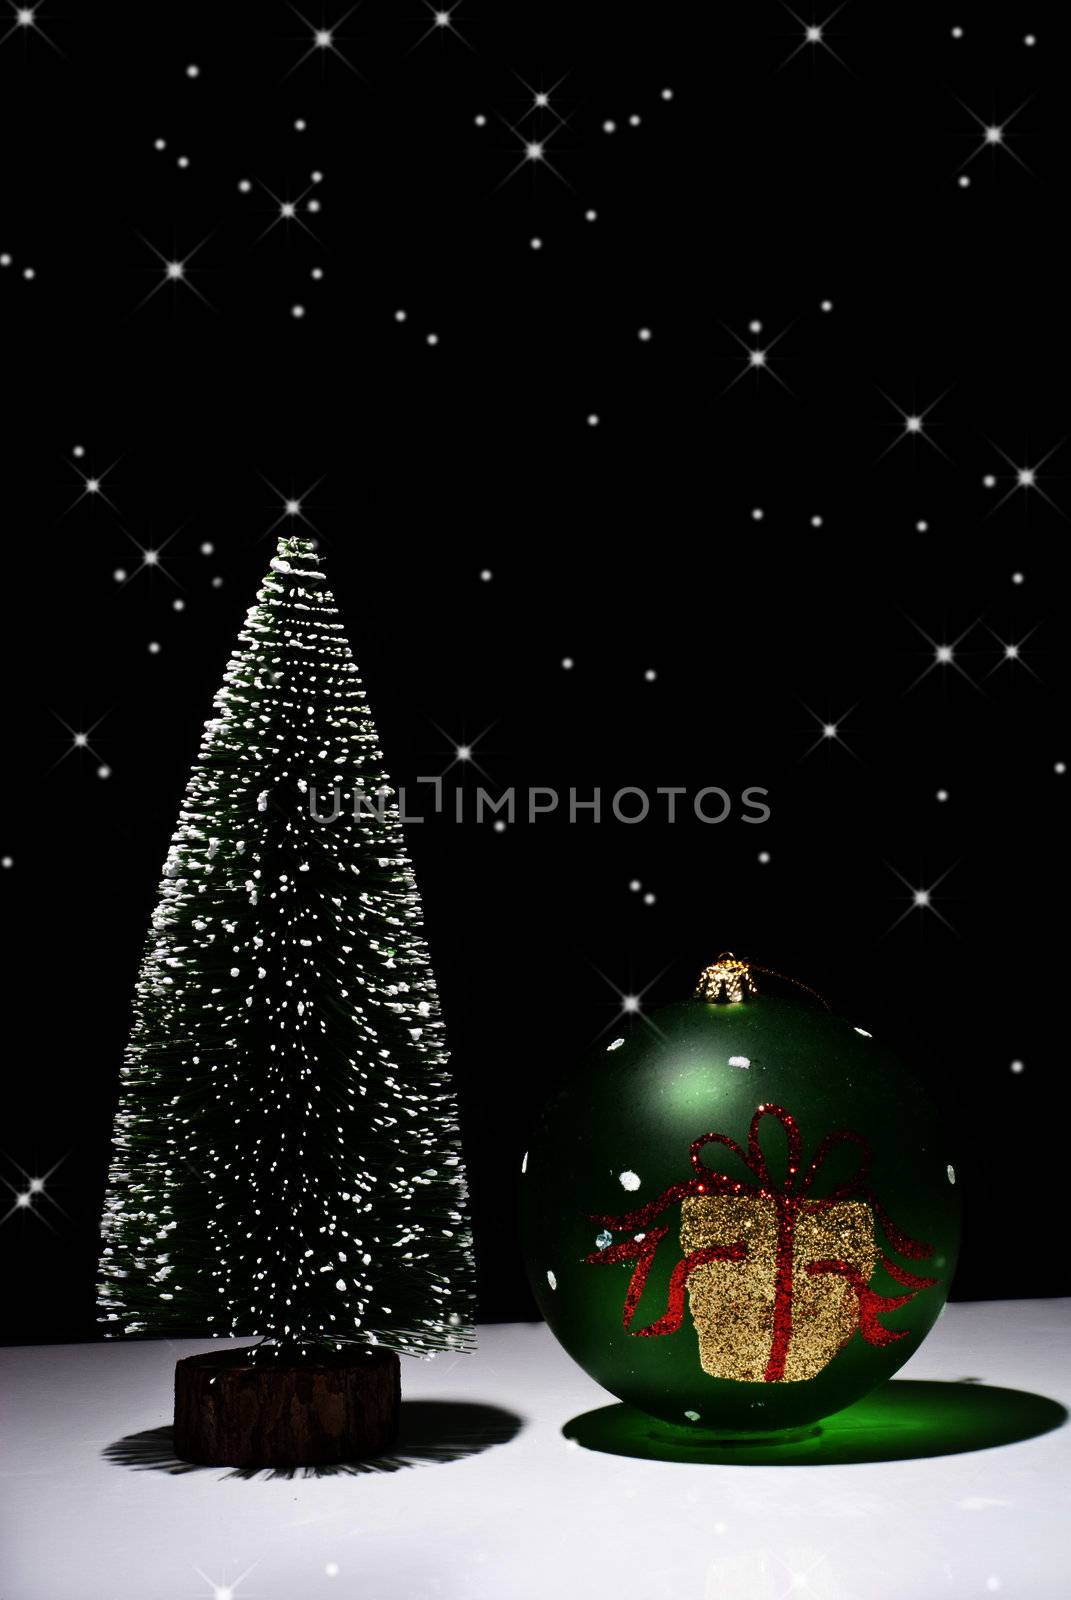 Christmas Tree and Christmas ball on a black background with stars